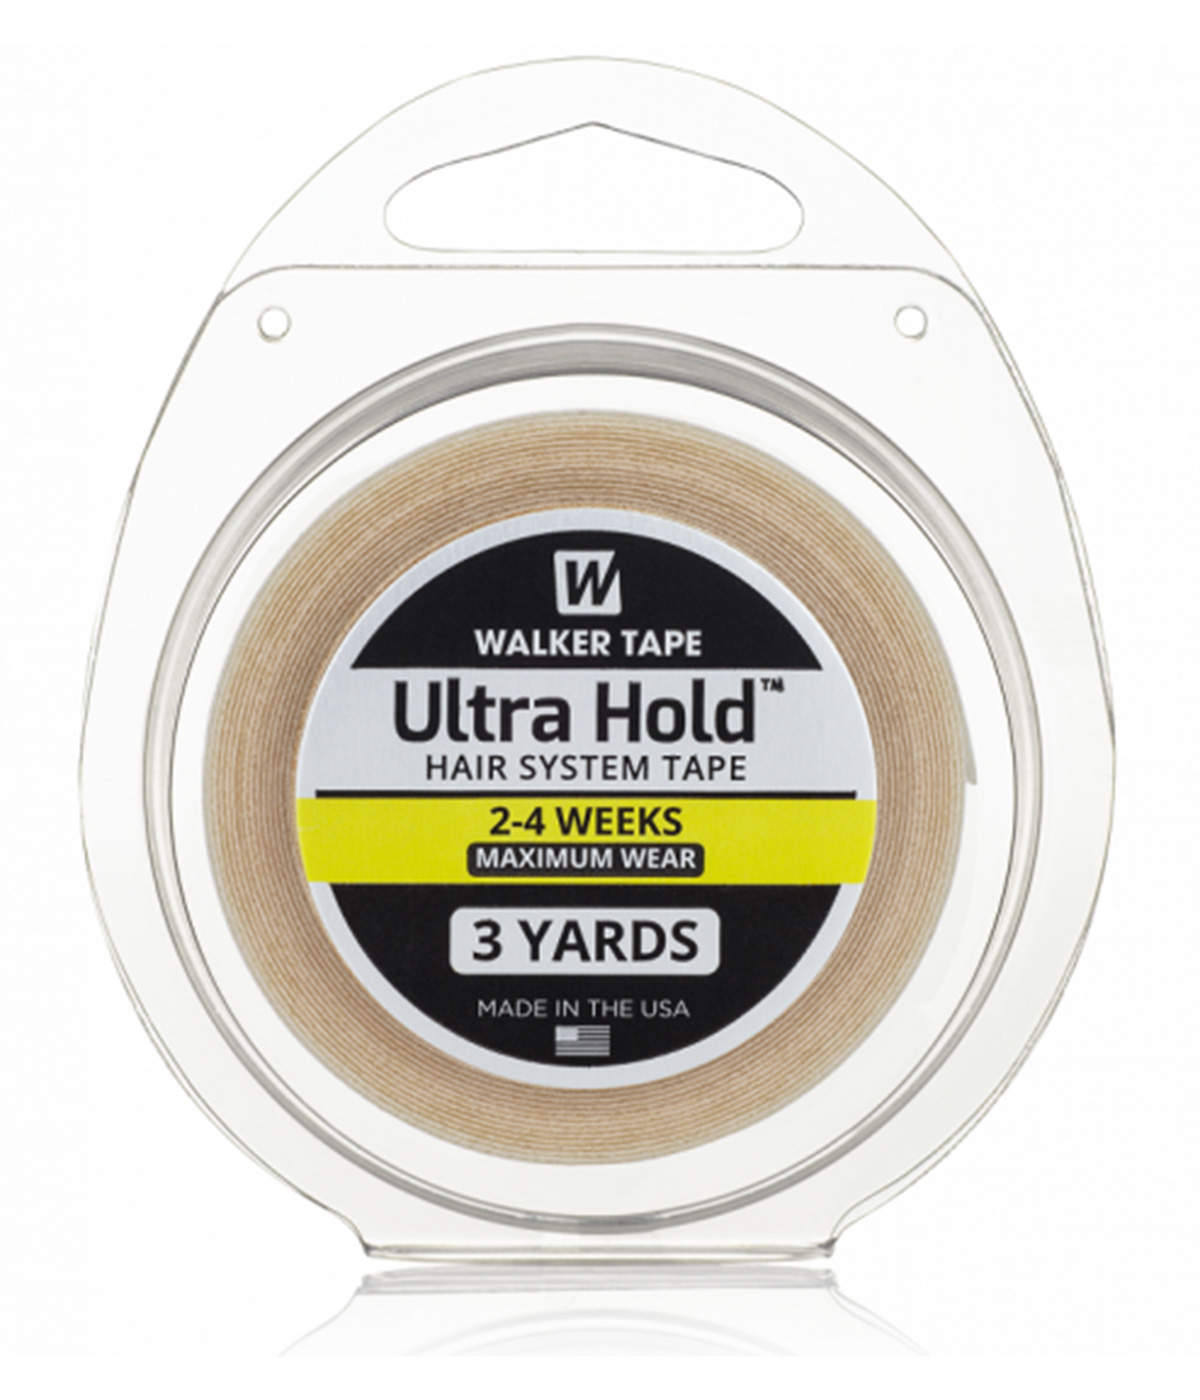 Ultra Hold Hair System Tape in Roll